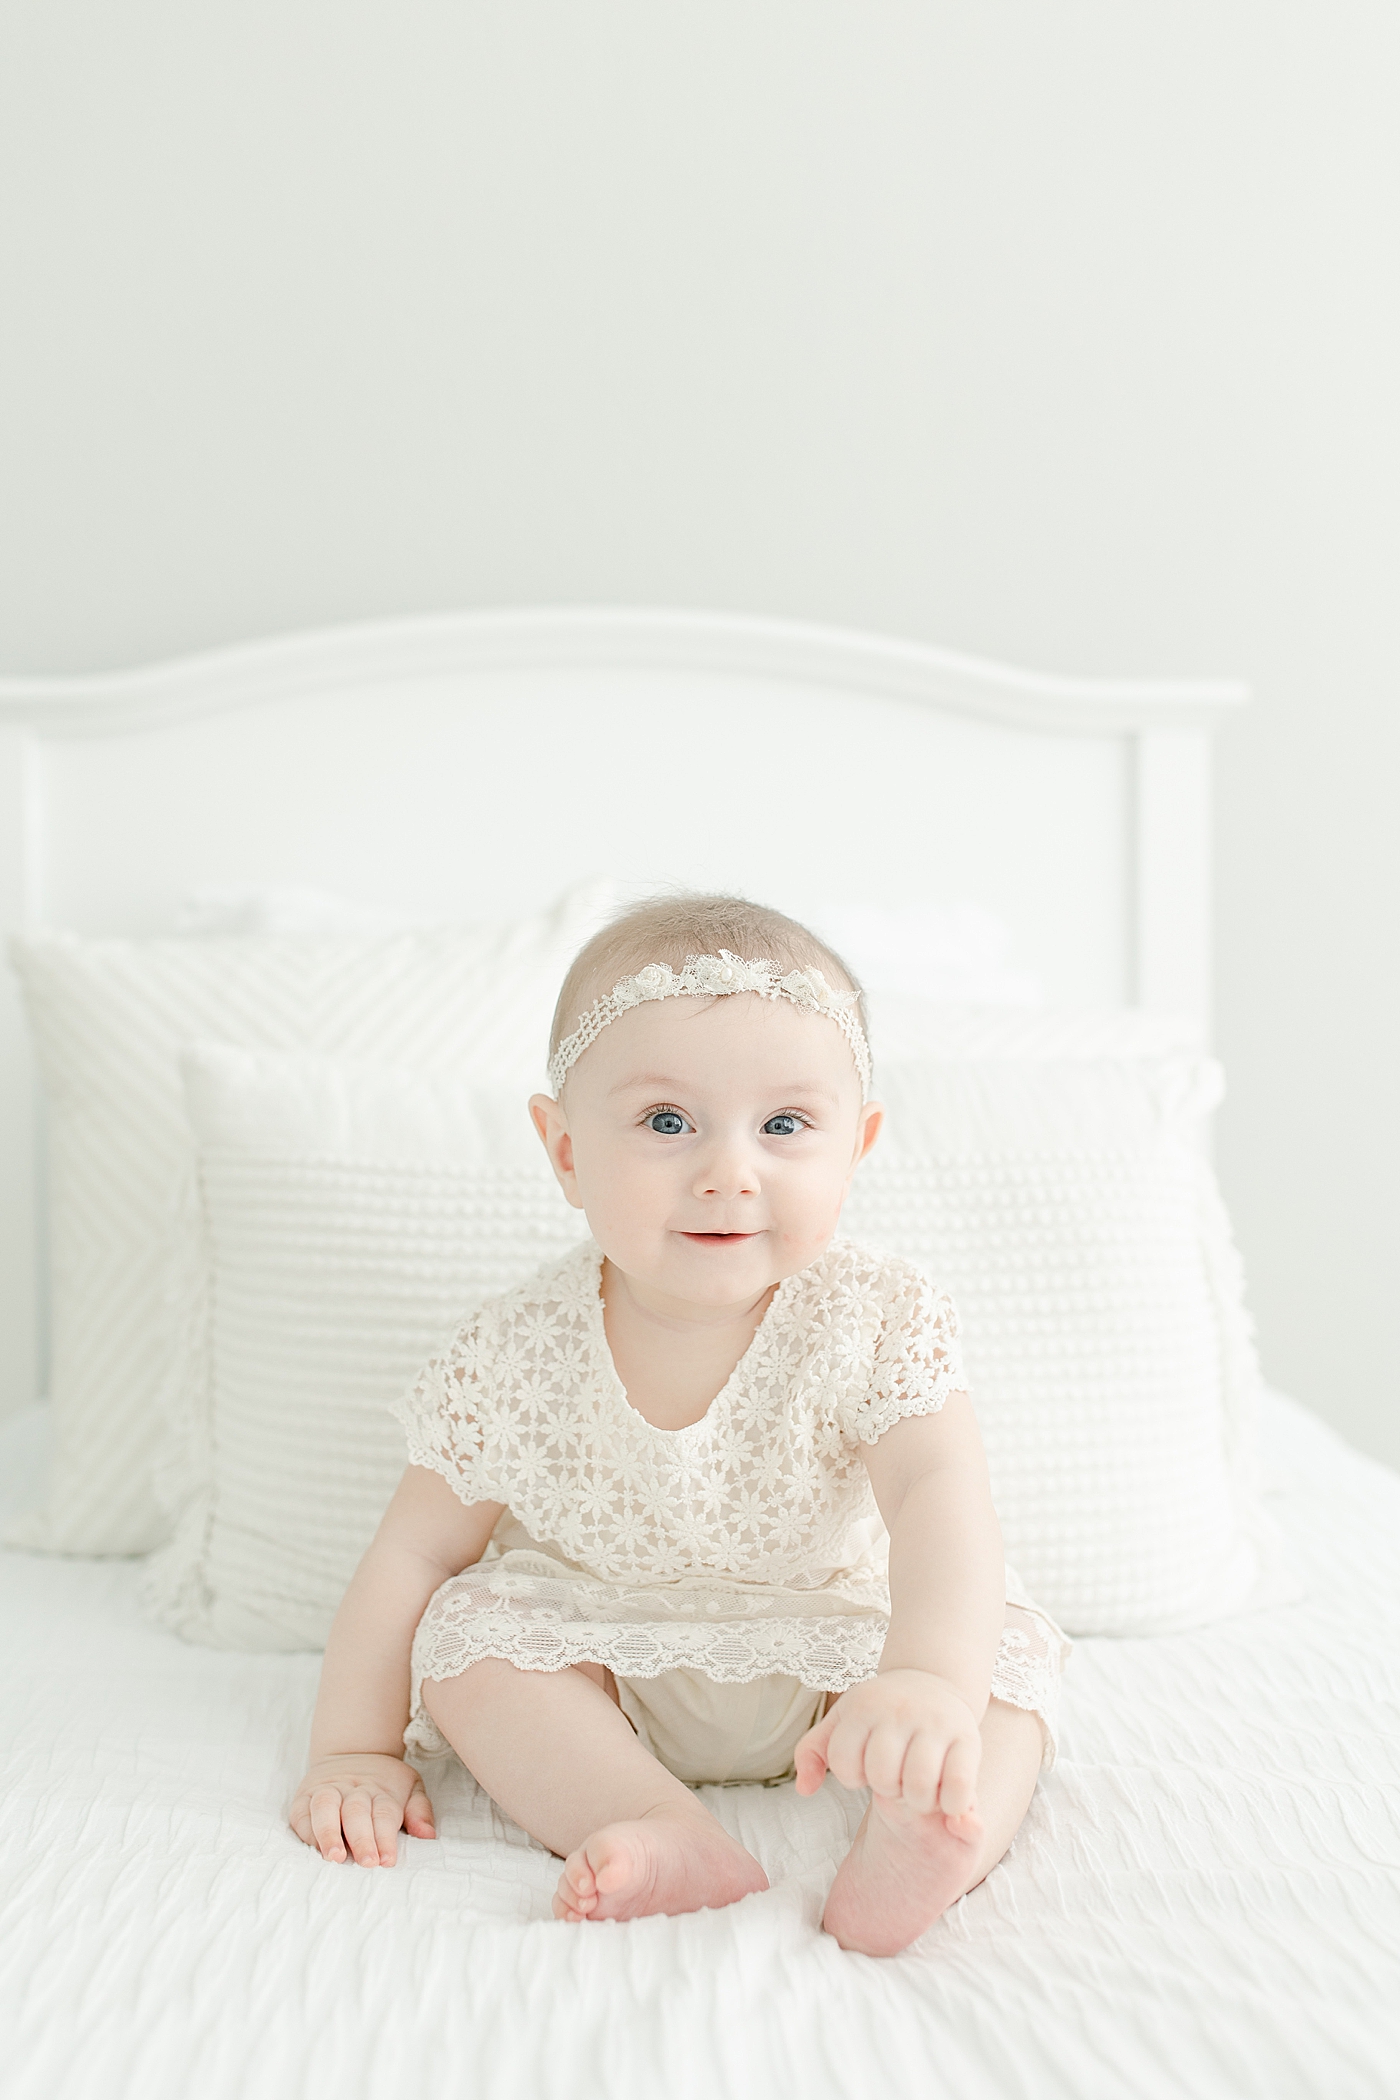 Blue eyed baby girl in white dress sitting on a bed | Photo by Pass Christian baby photographer Little Sunshine Photography